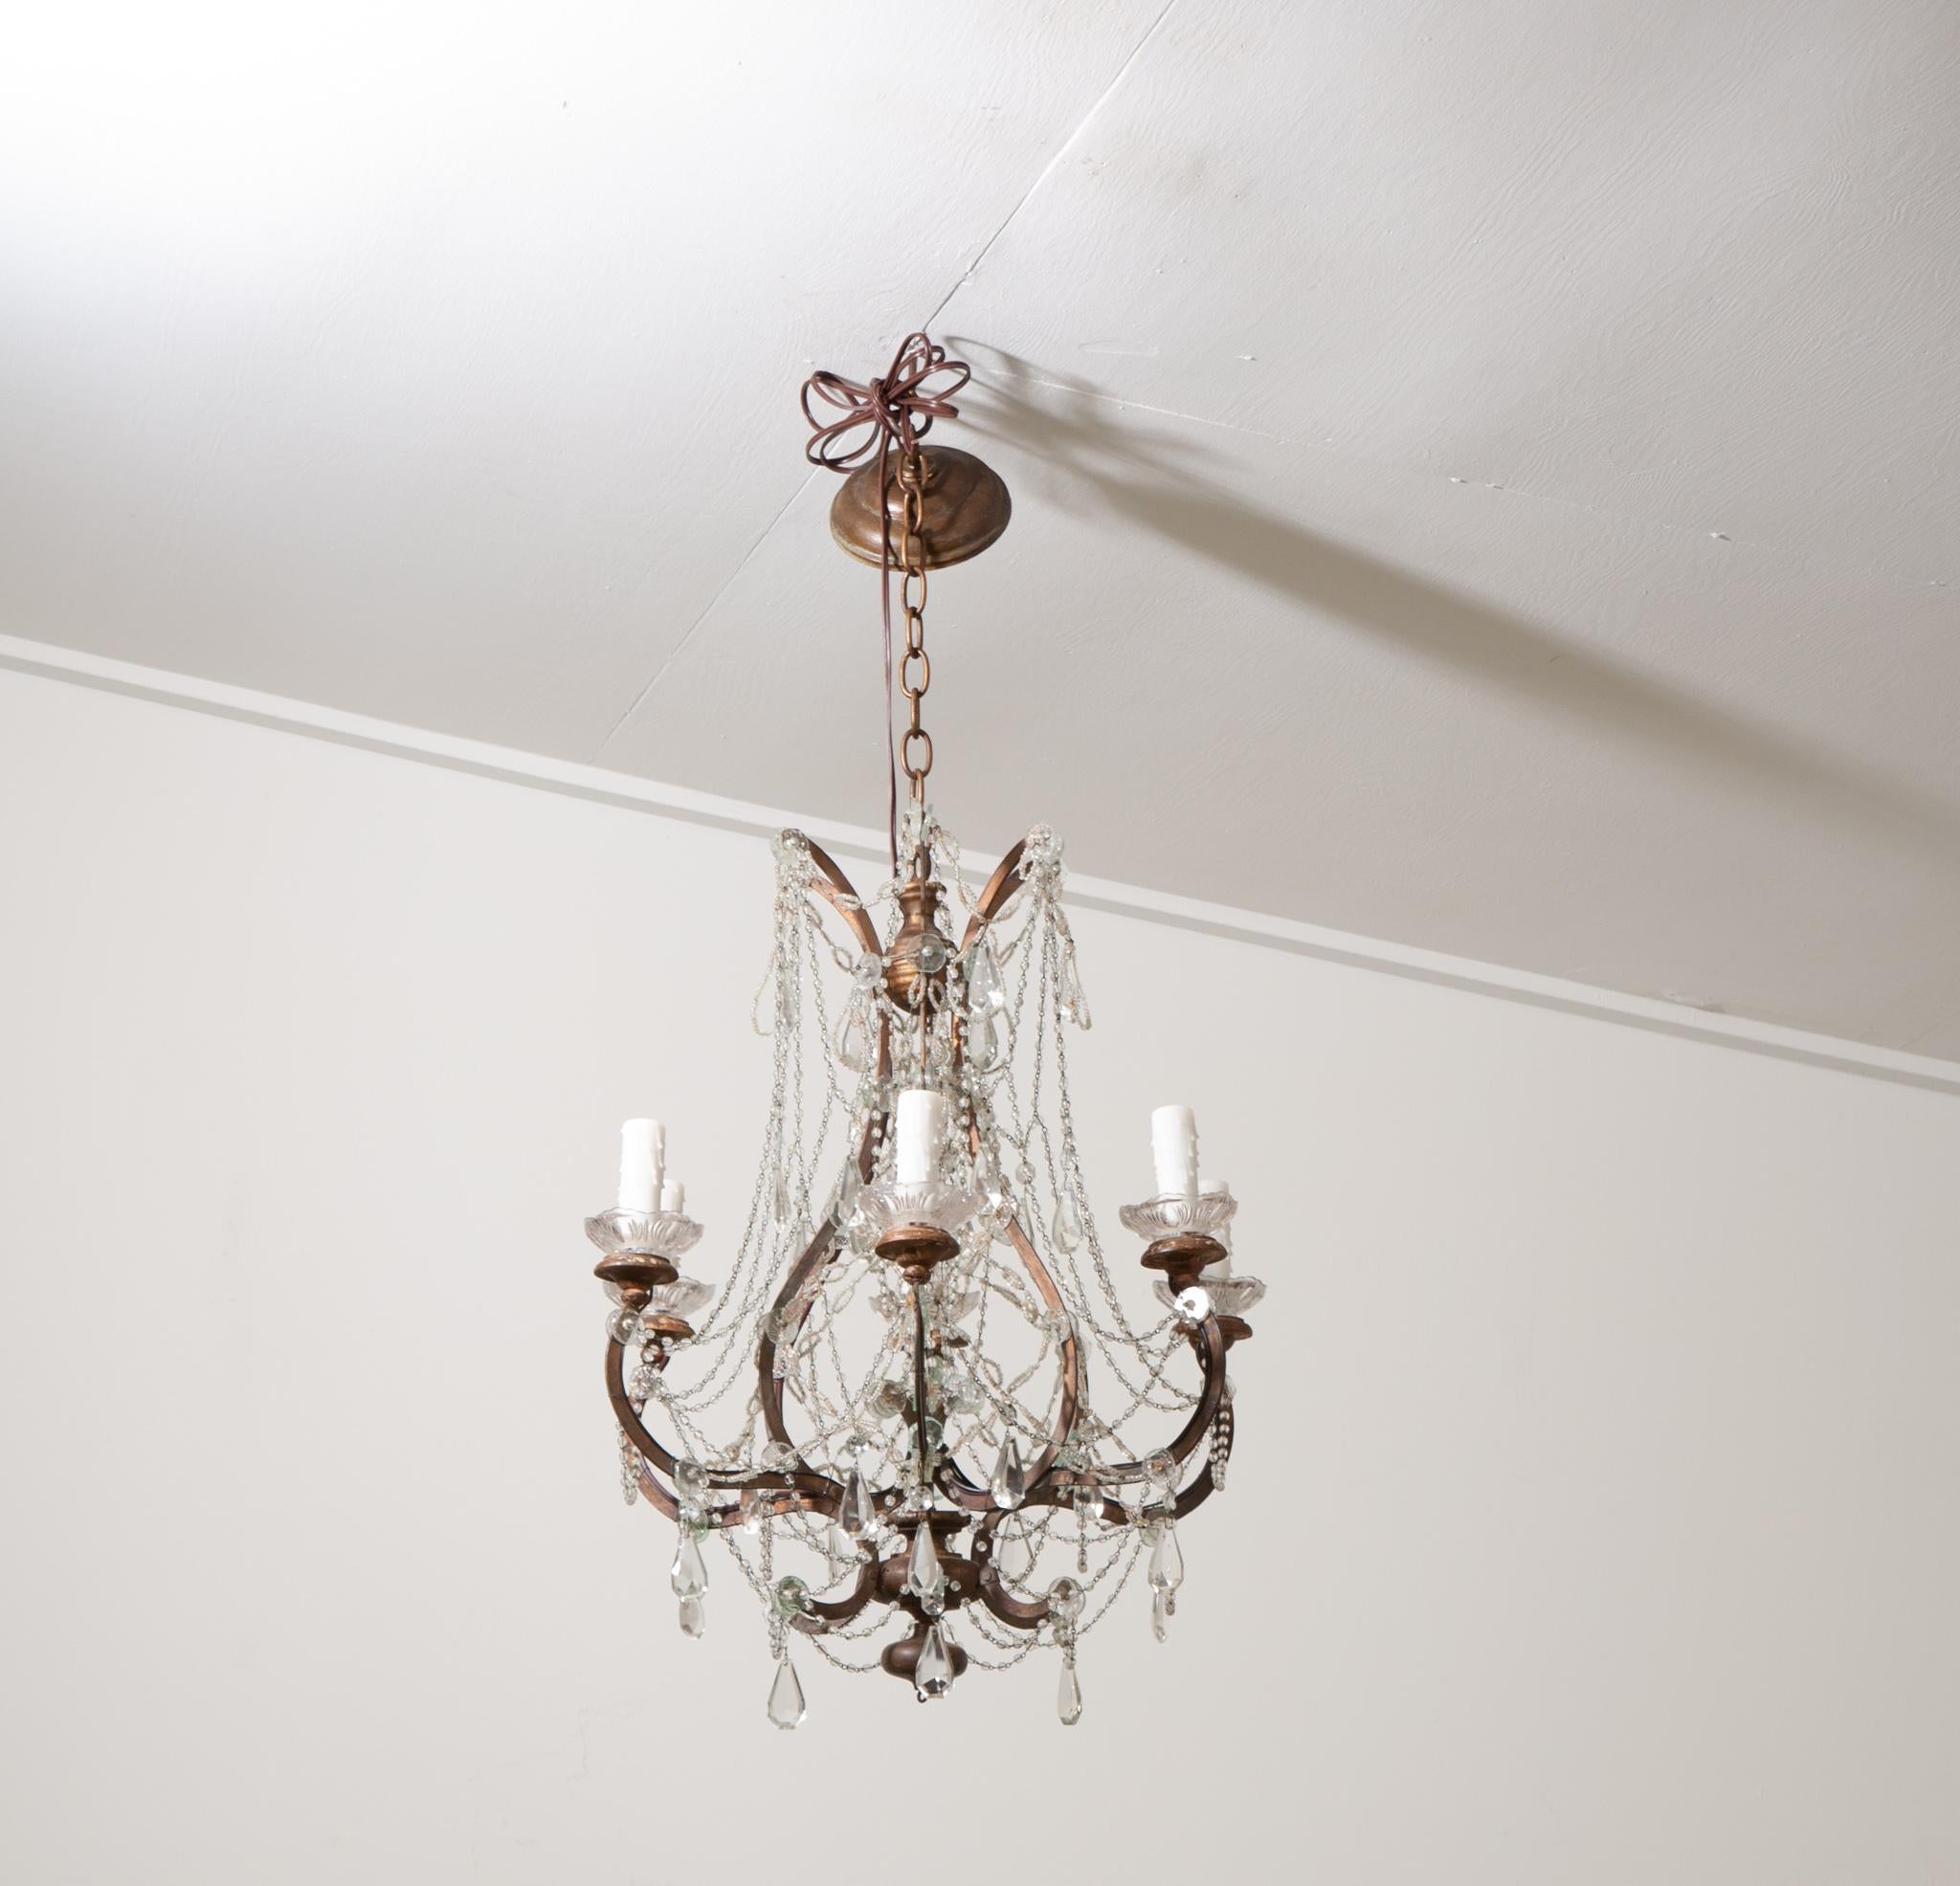 This French stunning 8 light chandelier is the perfect fixture for your interior. Hand cut crystal drops and crystal swags are found throughout the fixture and its perfectly patinated, heavy and quality bronze and carved giltwood frame.